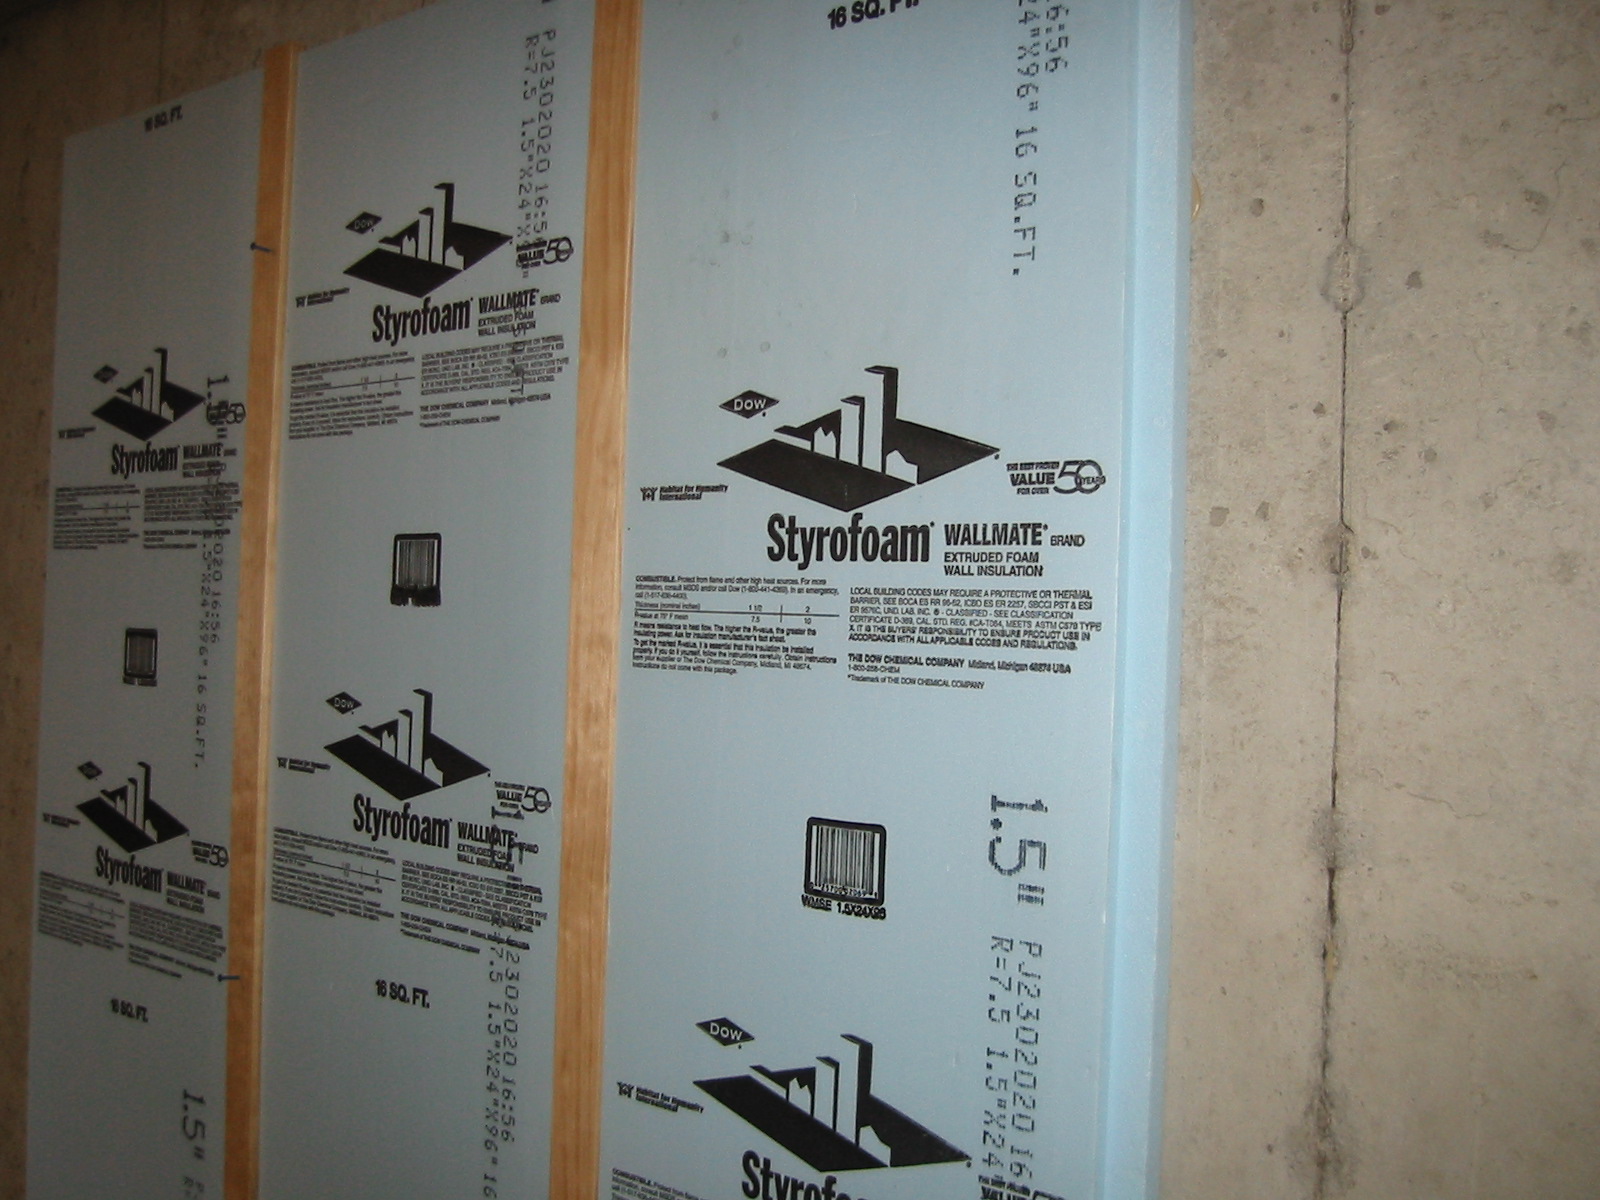 Rigid foam insulation is installed directly in contact with the below-grade basement wall. This stops water vapor from passing into the home and also keeps warm and moist interior air from condensing on the cold walls